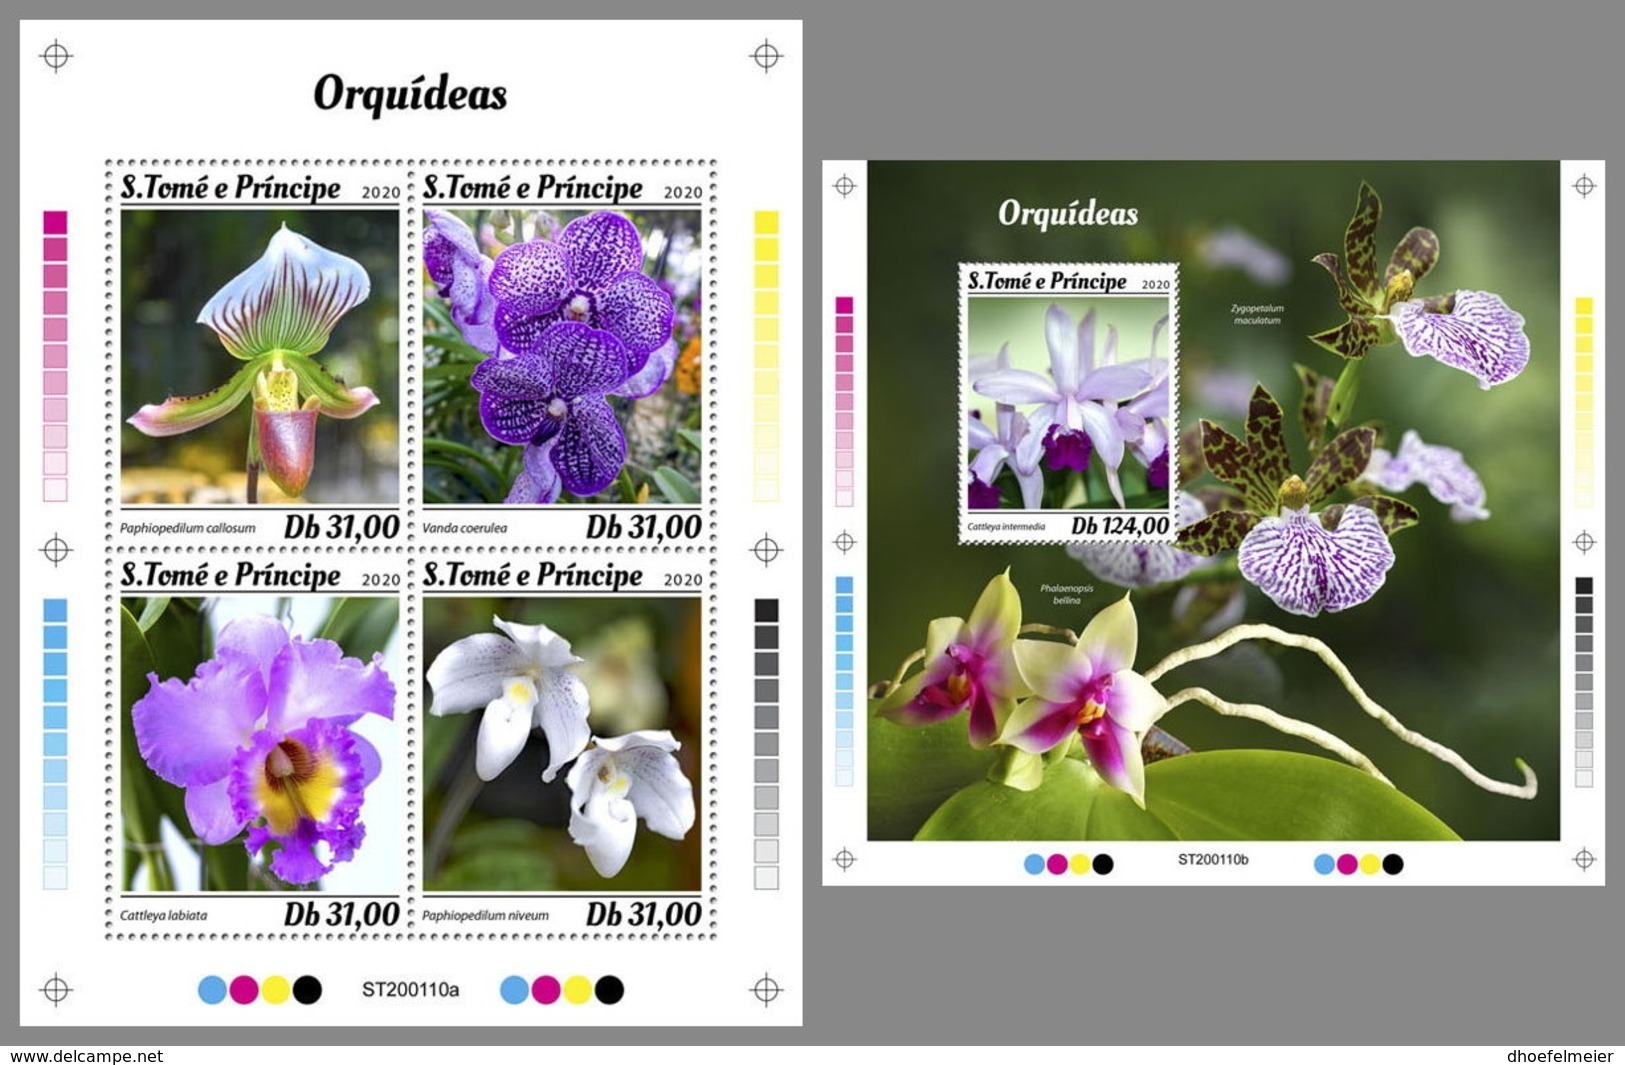 SAO TOME 2020 MNH Orchids Orchideen Orchidees M/S+S/S - OFFICIAL ISSUE - DH2015 - Orchids